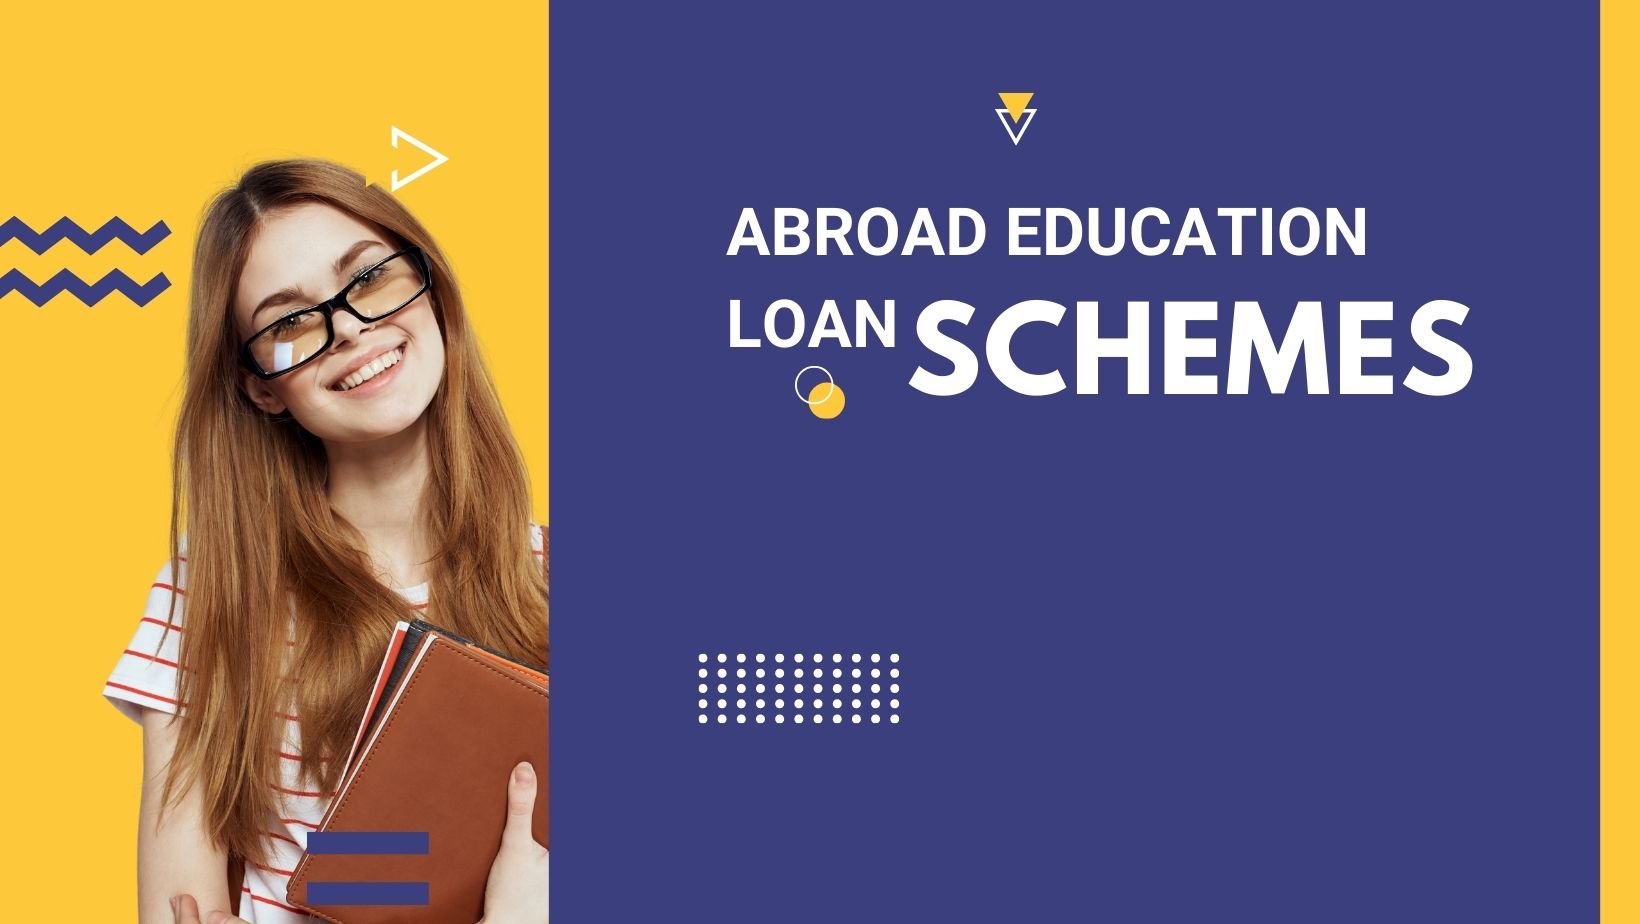 Loan schemes and financial lenders for abroad education loan